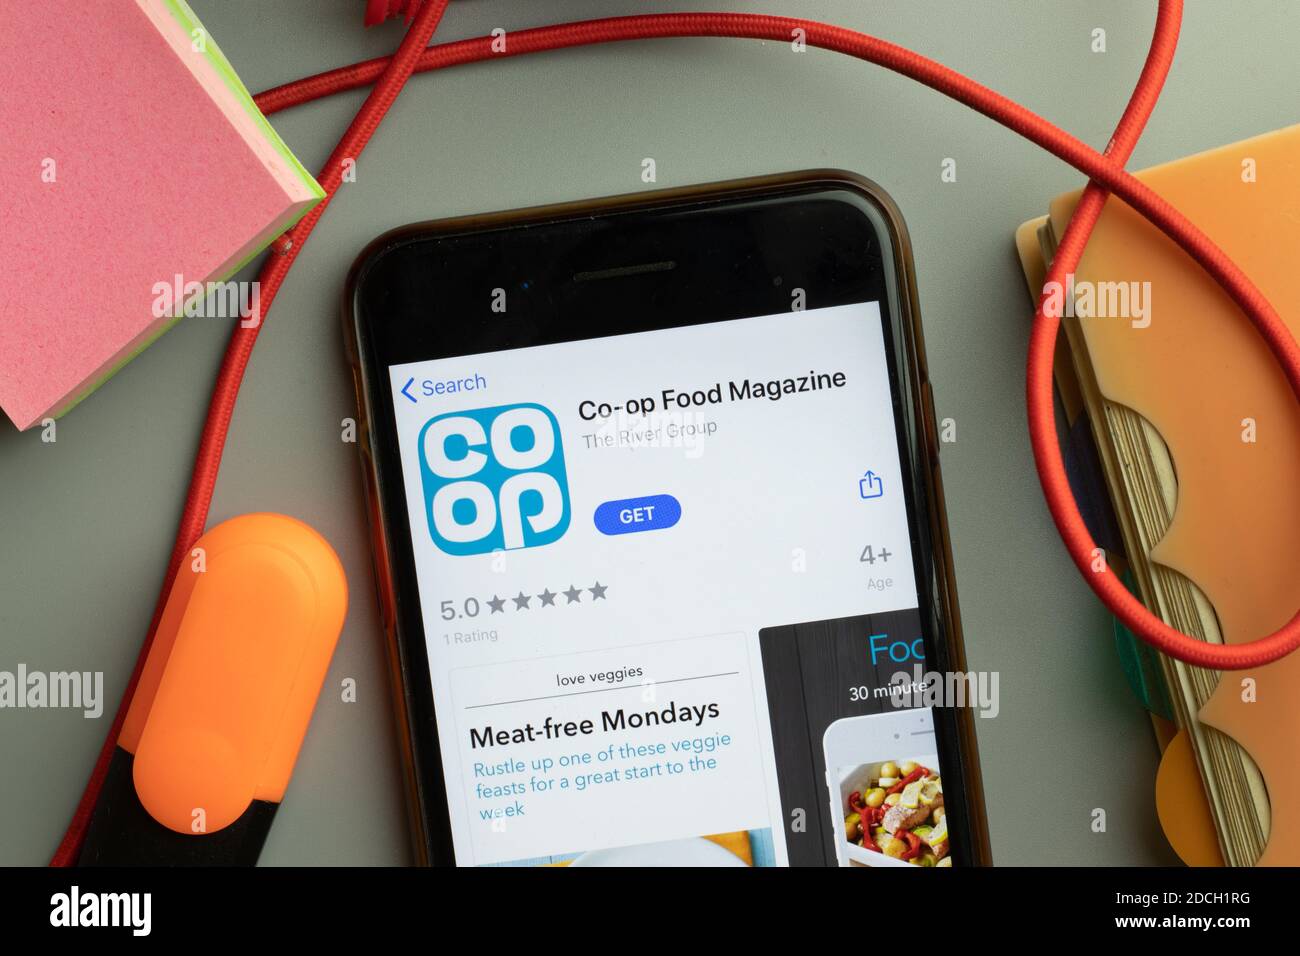 New York, United States - 7 November 2020: Co-op co op Food Magazine app store logo on phone screen, Illustrative Editorial. Stock Photo